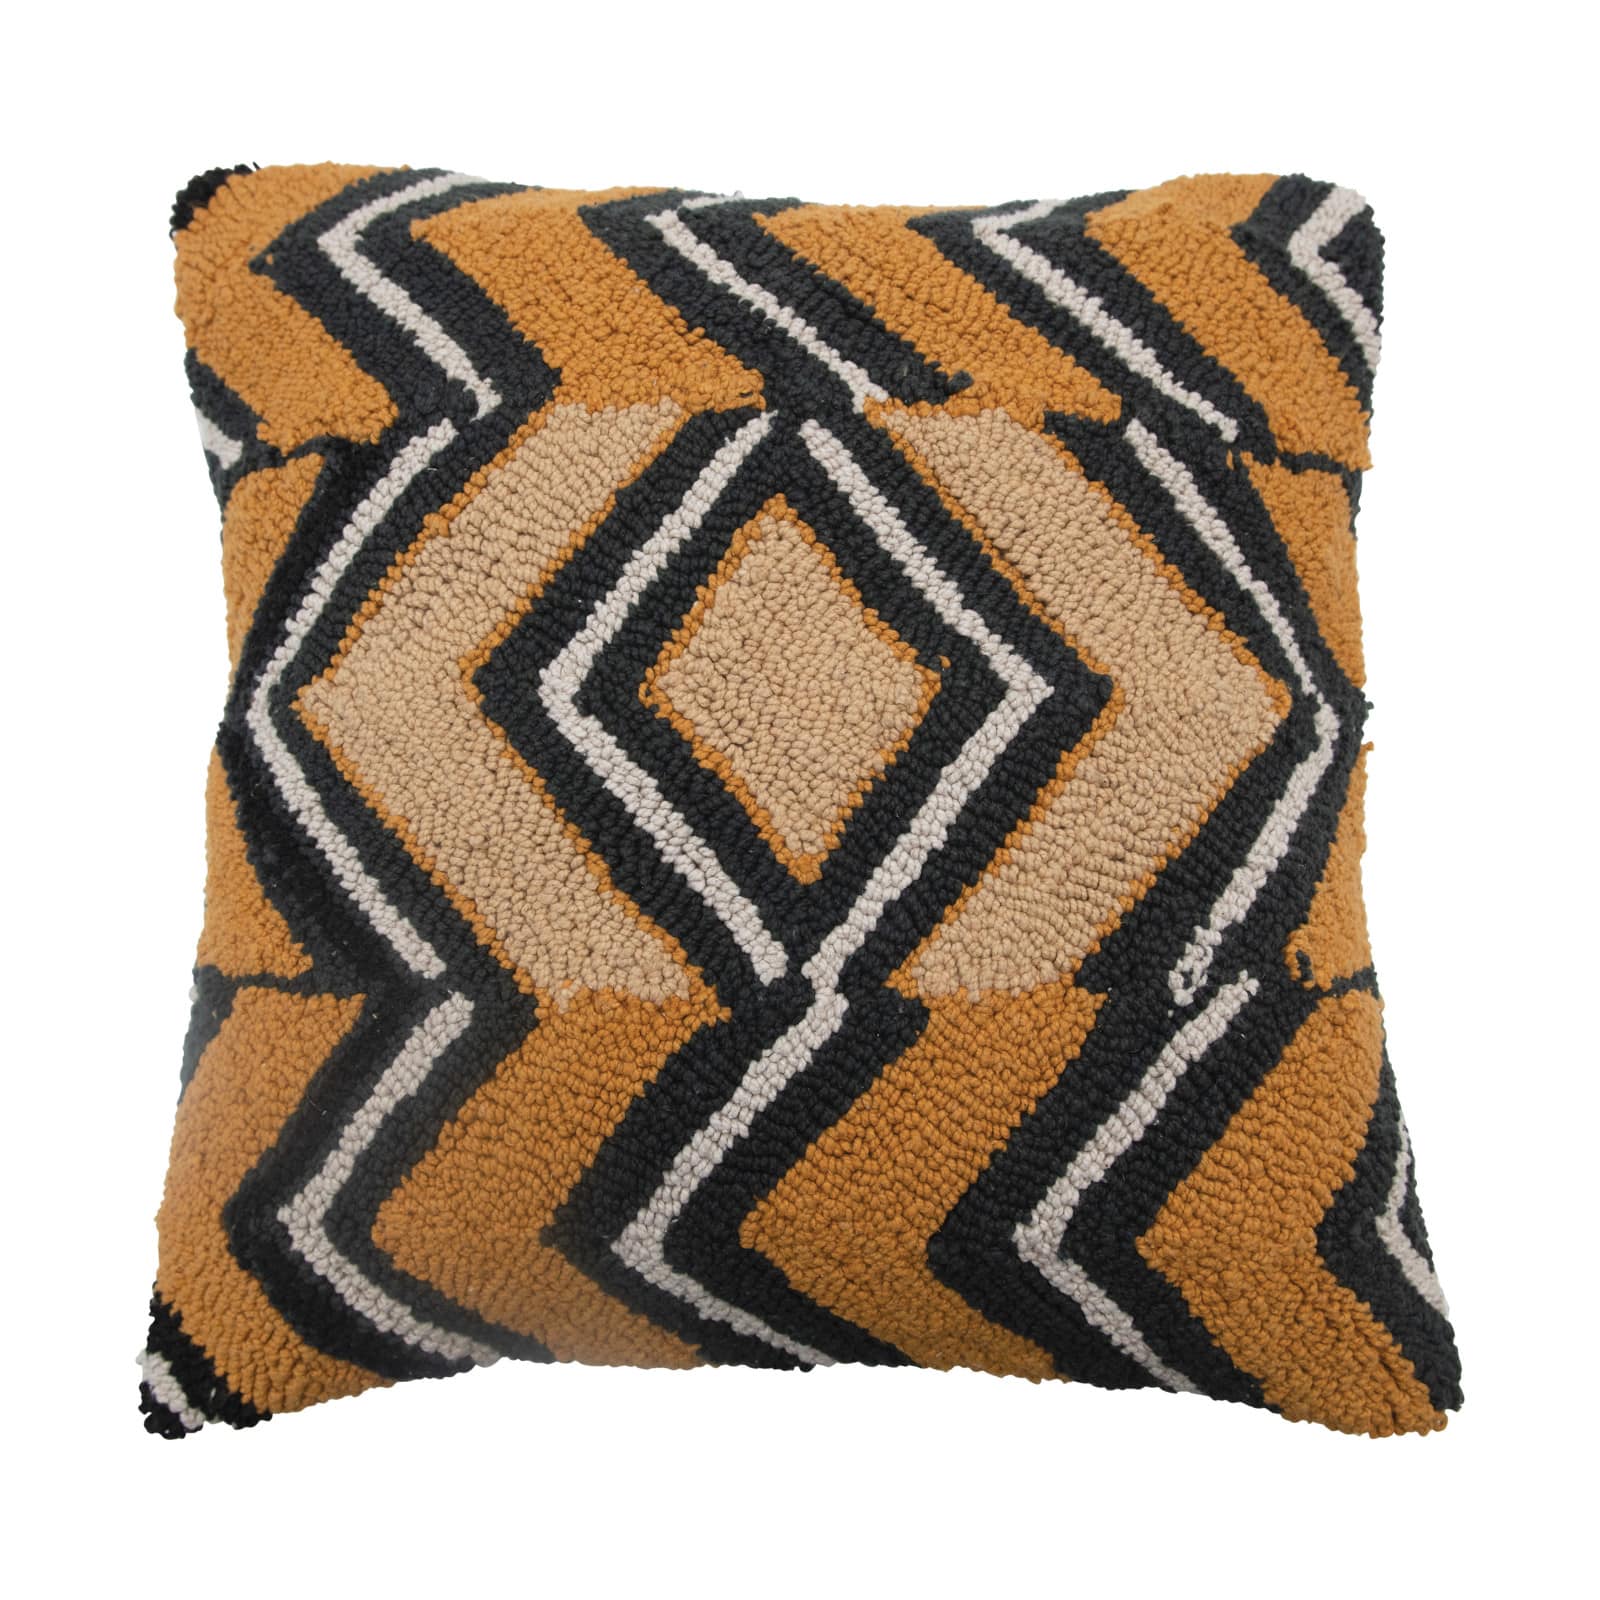 Square Cotton Punch Hook Pillow